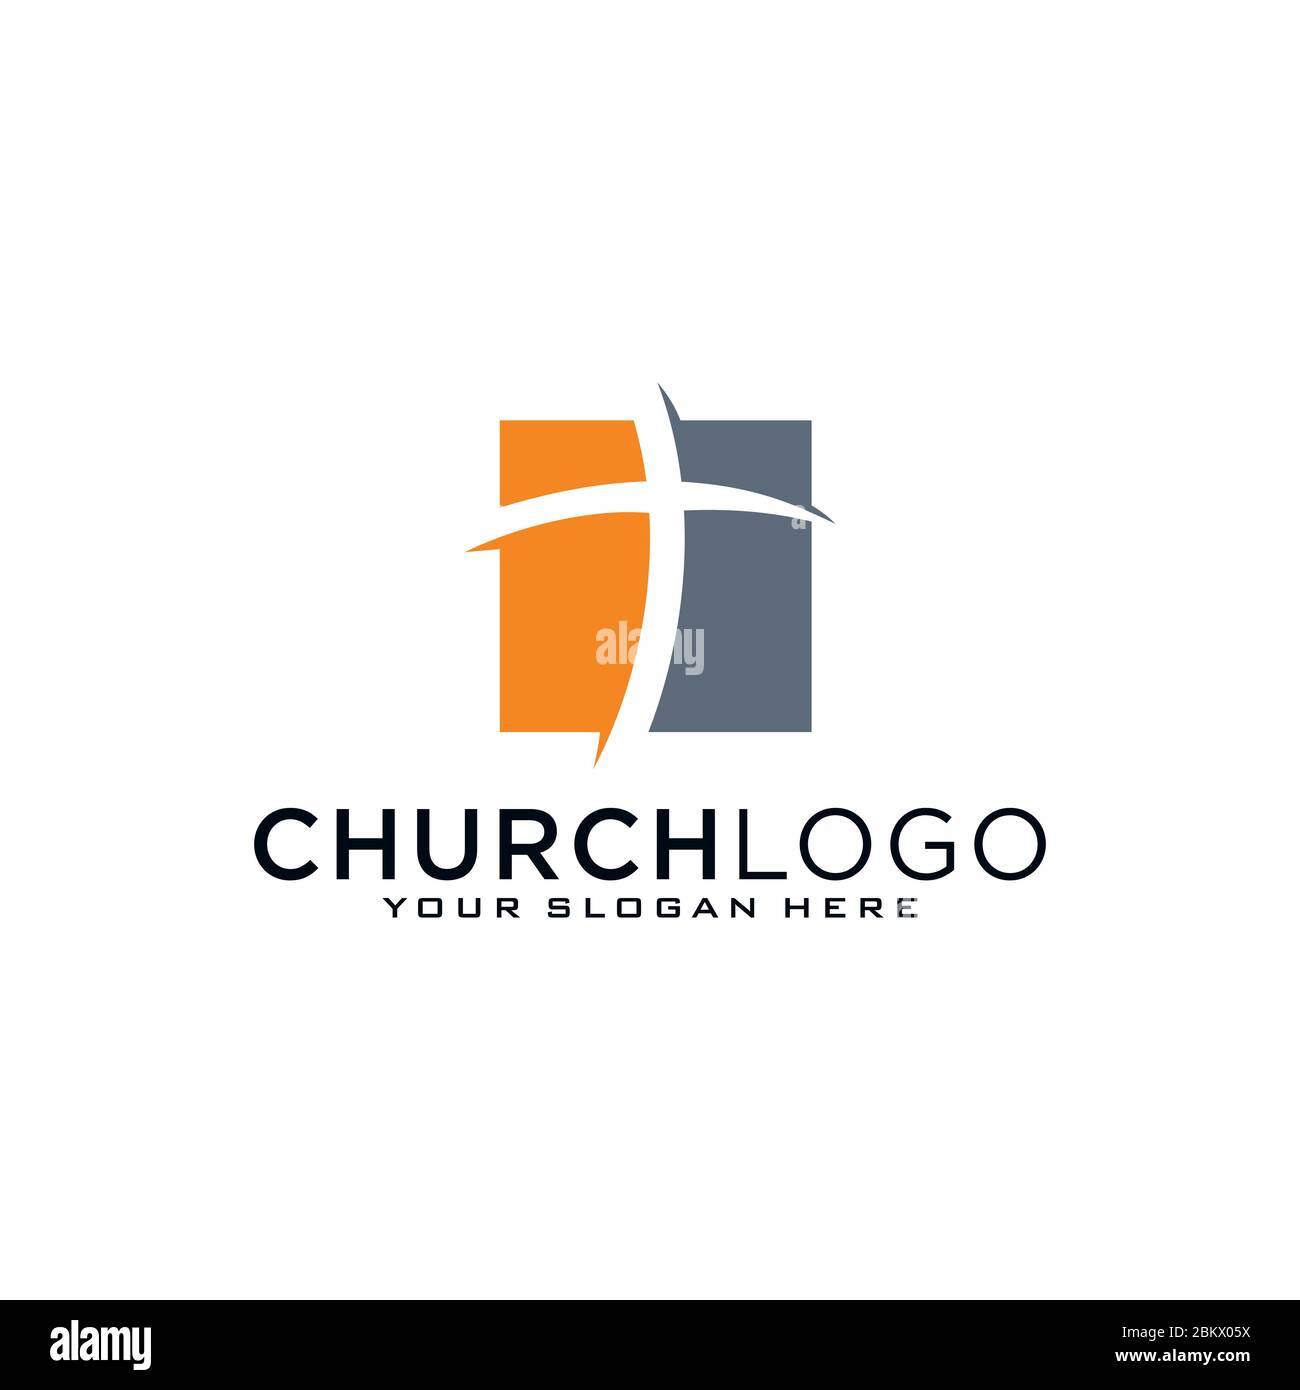 Church logo. Christian symbols. The Cross of Jesus, the fire of the Holy Spirit and the dove. Stock Vector